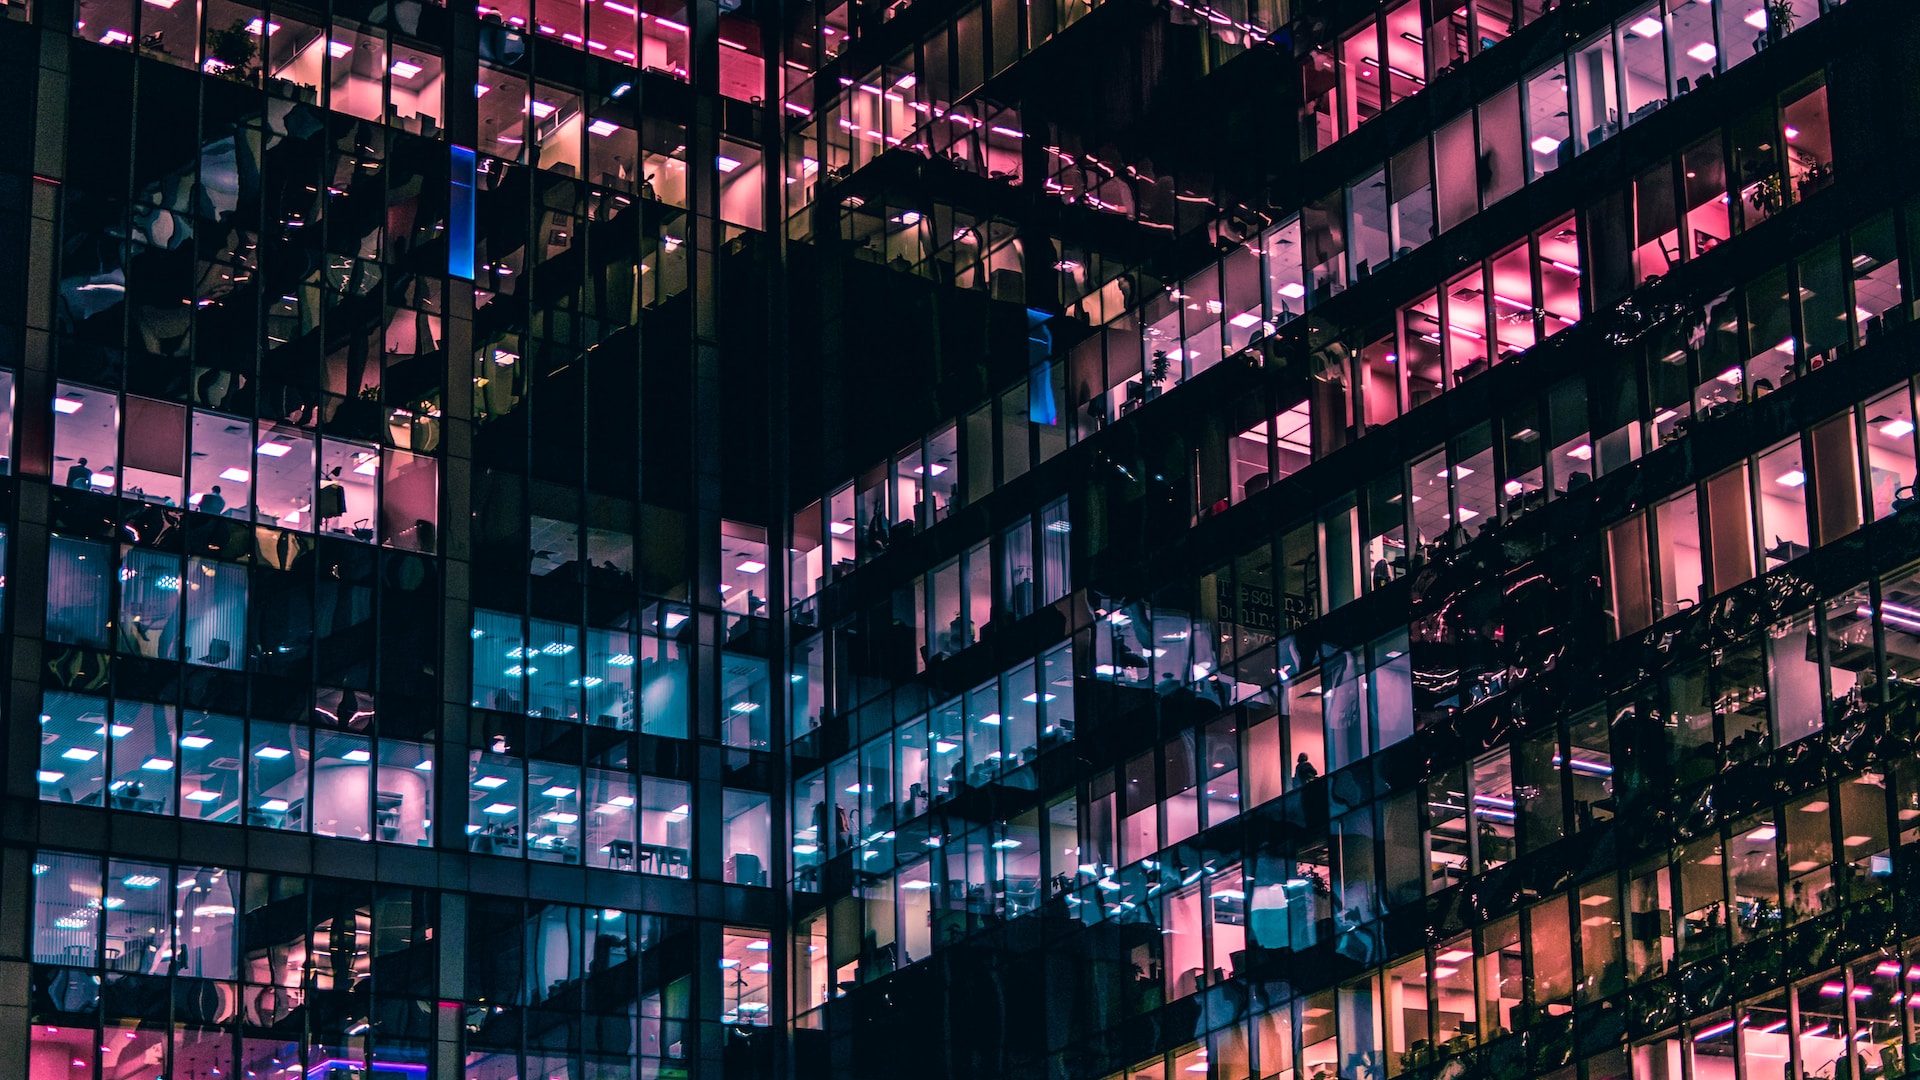 Offices in a hue of purple light